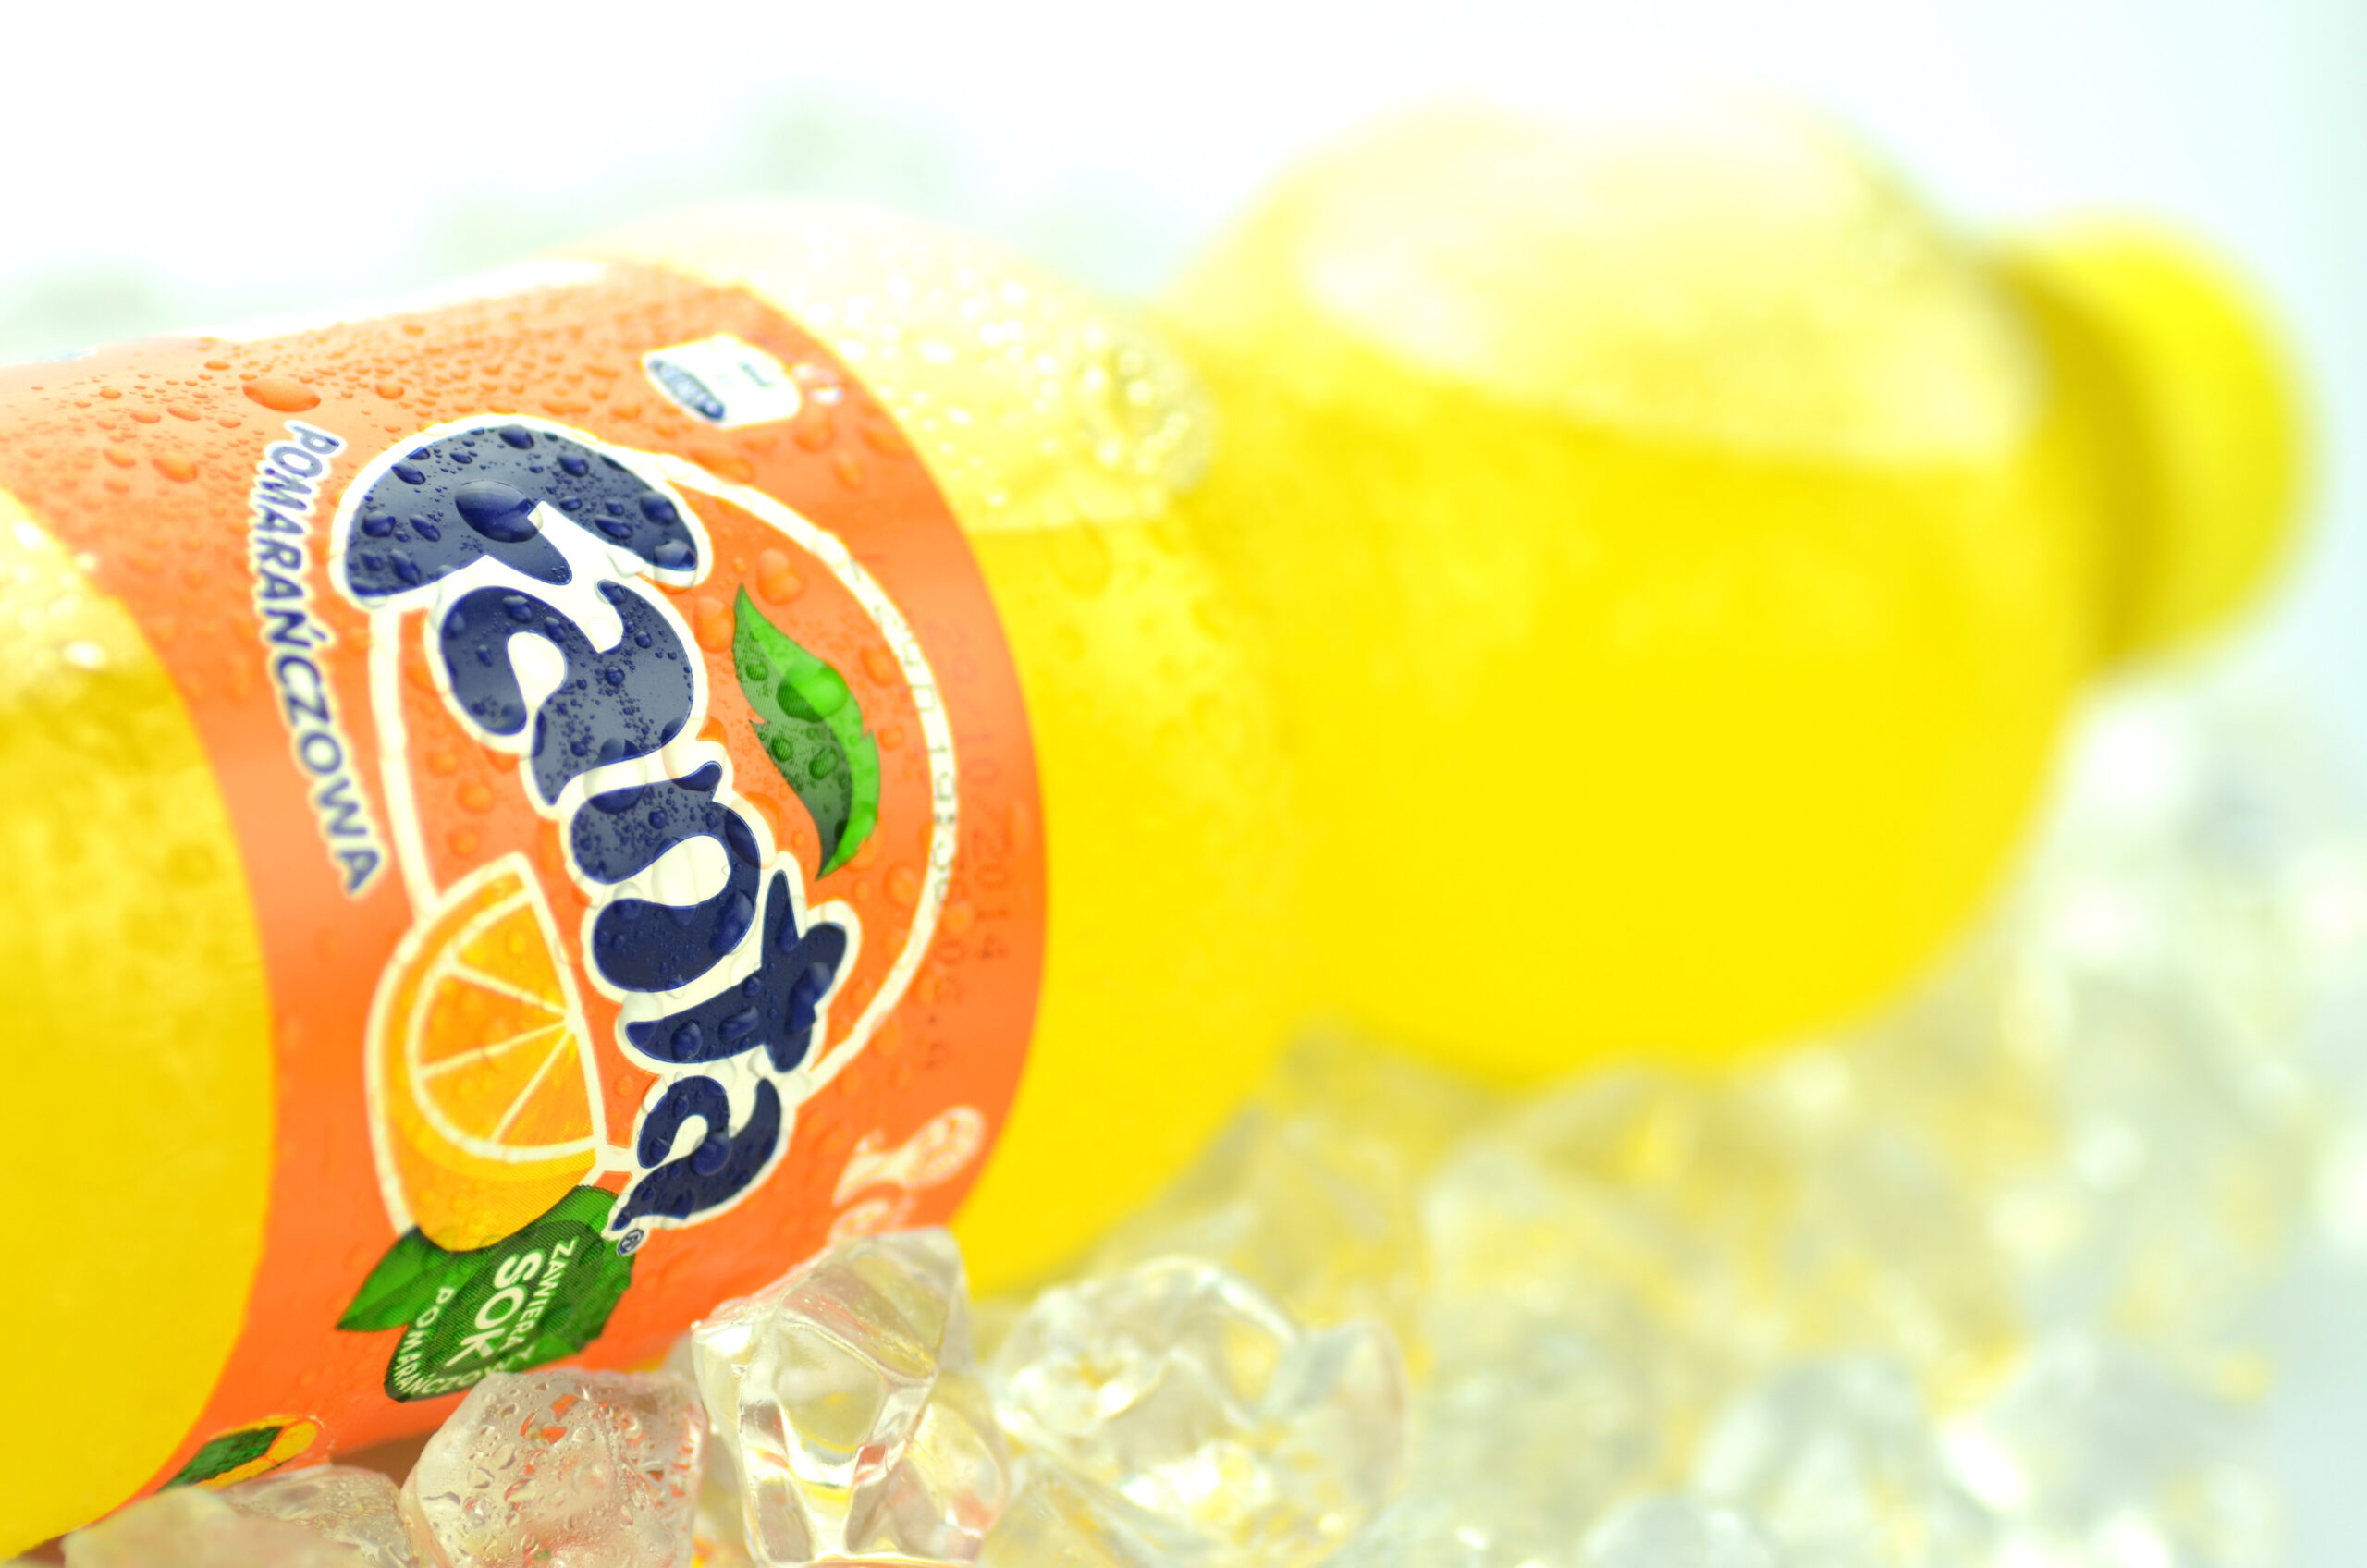 Kwidzyn, Poland - May 26, 2014: Bottle of Fanta drink on ice cubes. Fanta is fruit-flavored carbonated soft drink produced by Coca-Cola Company. Fanta was introduced in 1941